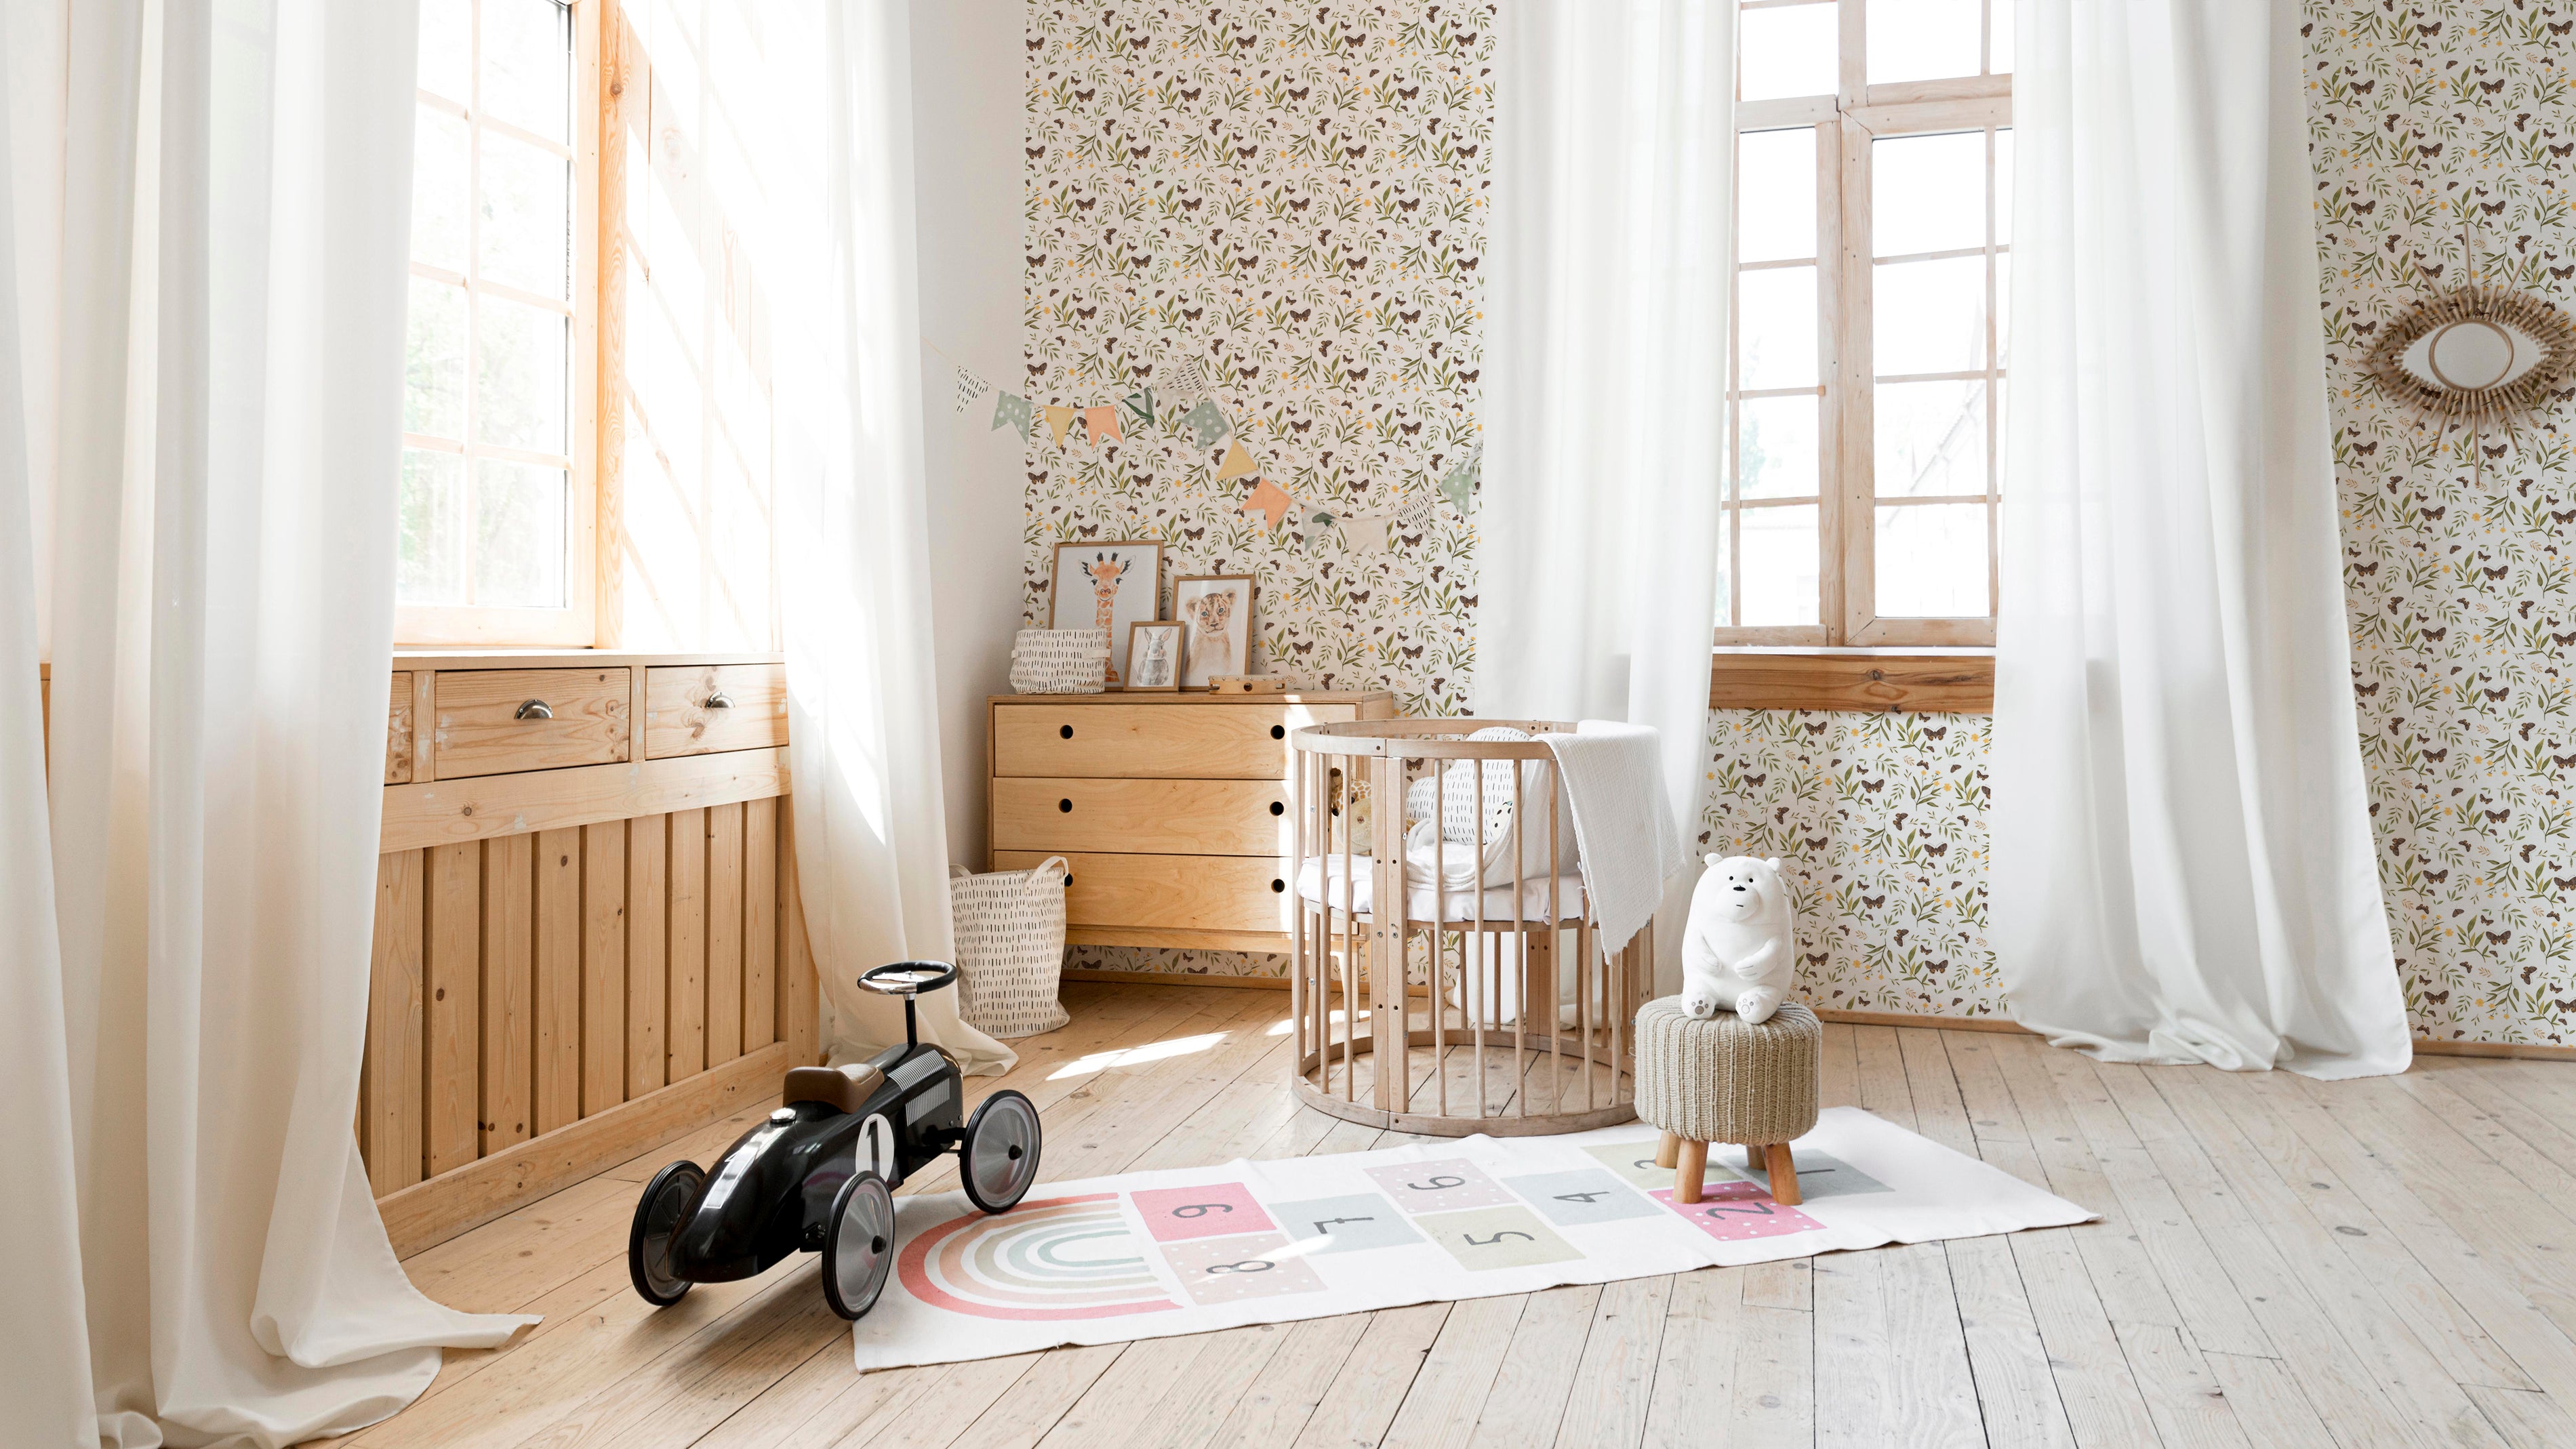 A children's nursery room beautifully adorned with Butterfly Floral Wallpaper. The wallpaper's pattern of brown butterflies, yellow flowers, and green leaves adds a playful and refreshing touch to the space, complemented by wooden furniture and a large window.